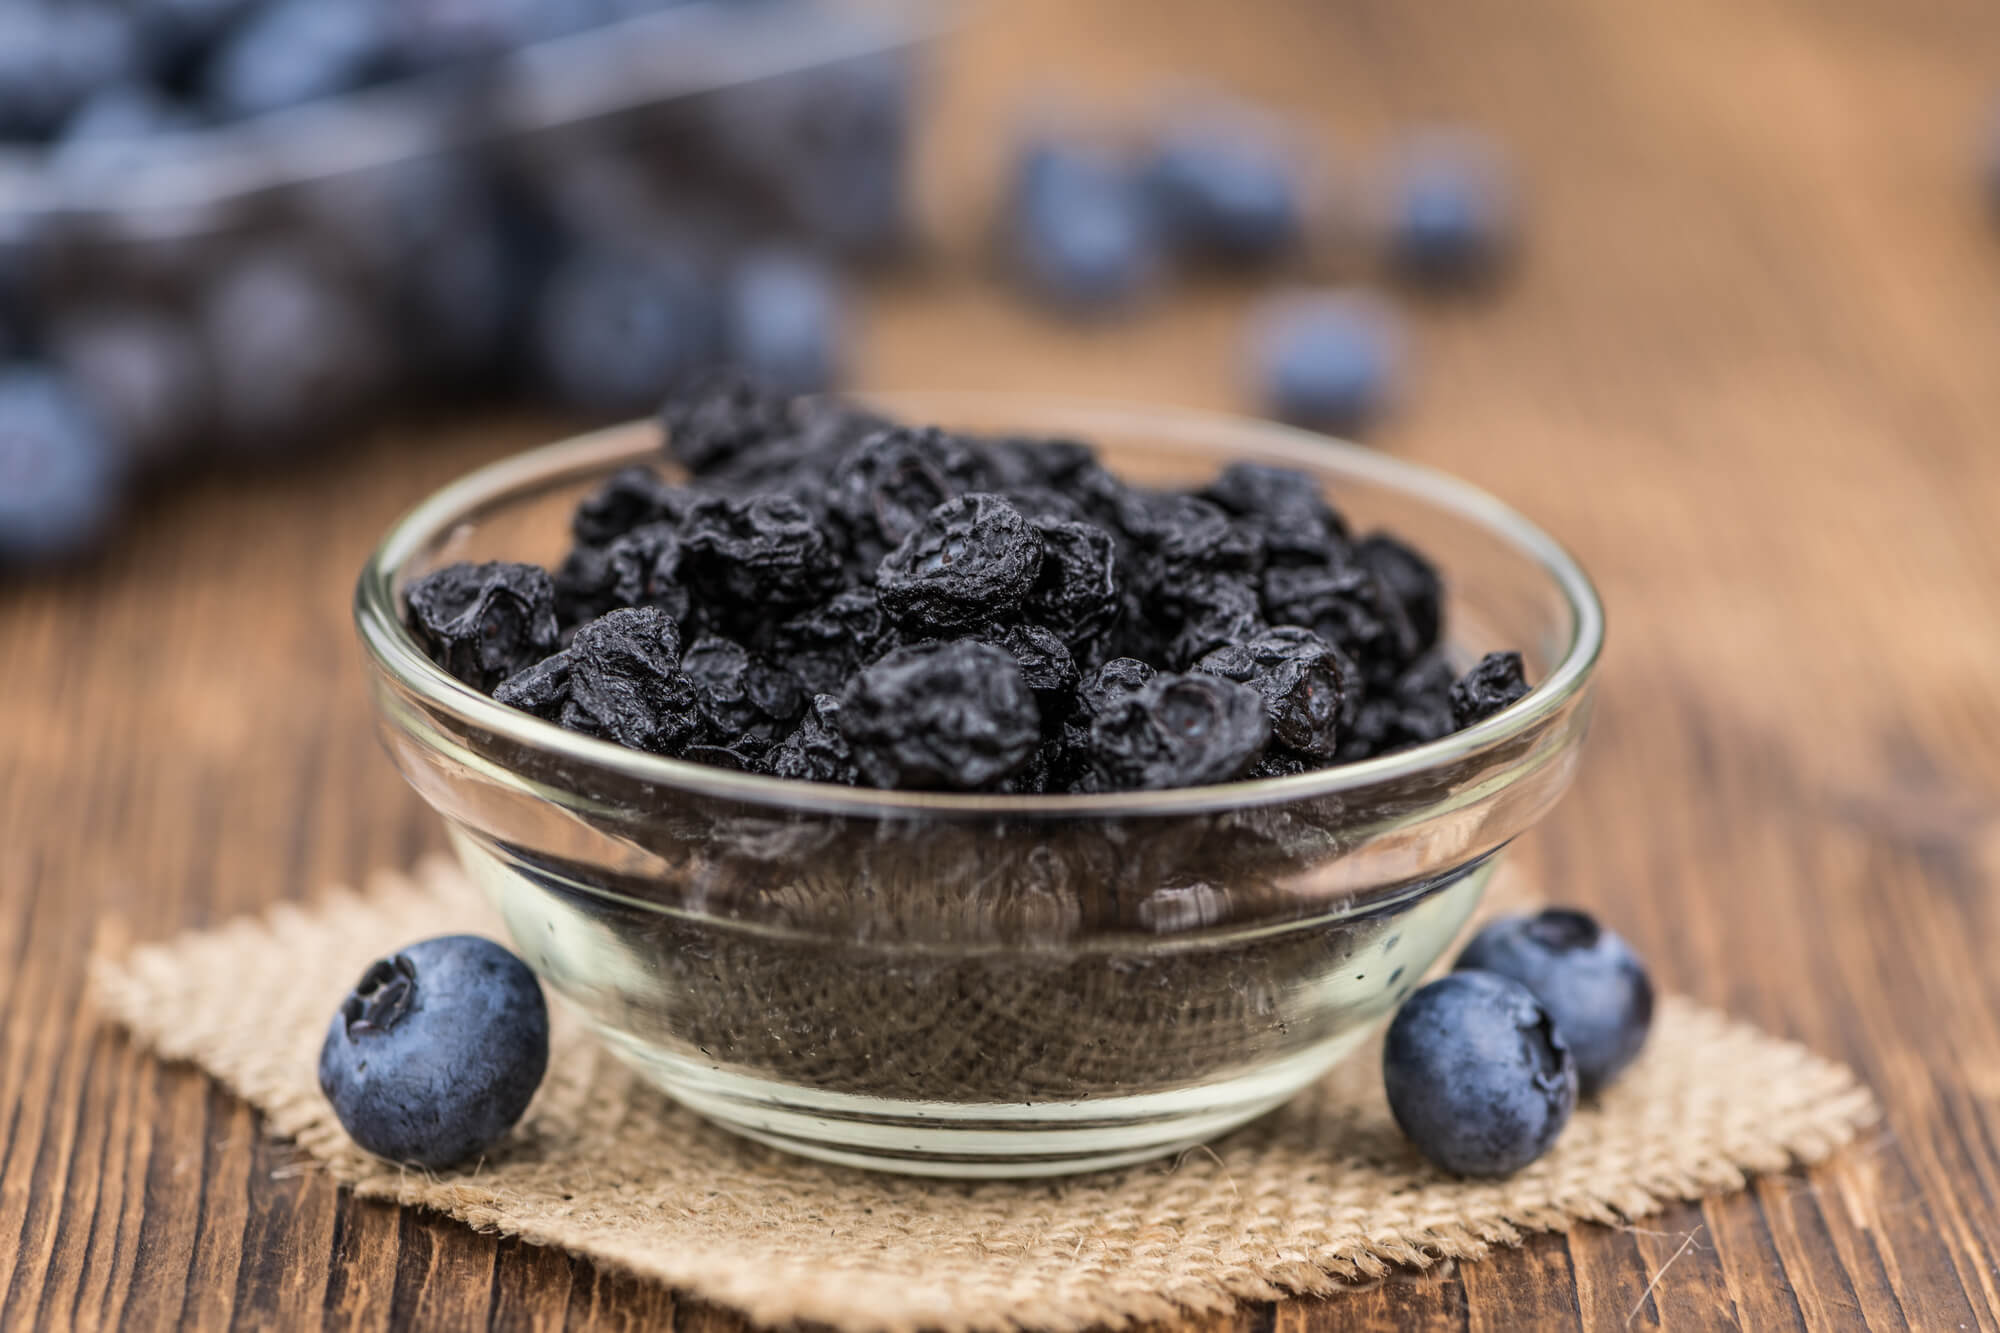 Blueberry Bliss: Incorporating Dried Blueberries into Baked Goods and Breakfast